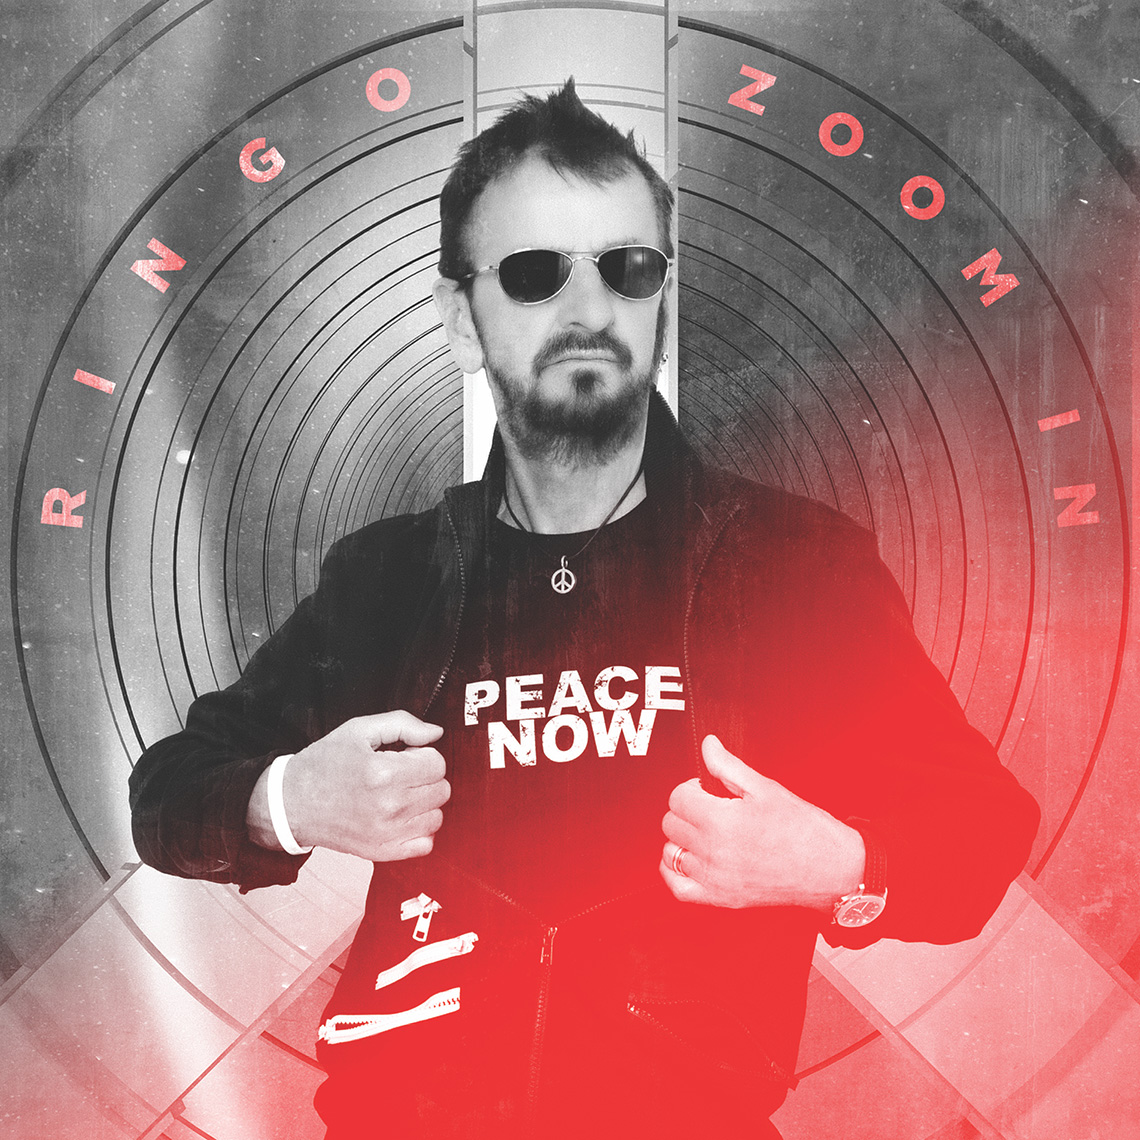 Ringo Starr wearing a Peace Now shirt for the cover art of his EP Zoom In